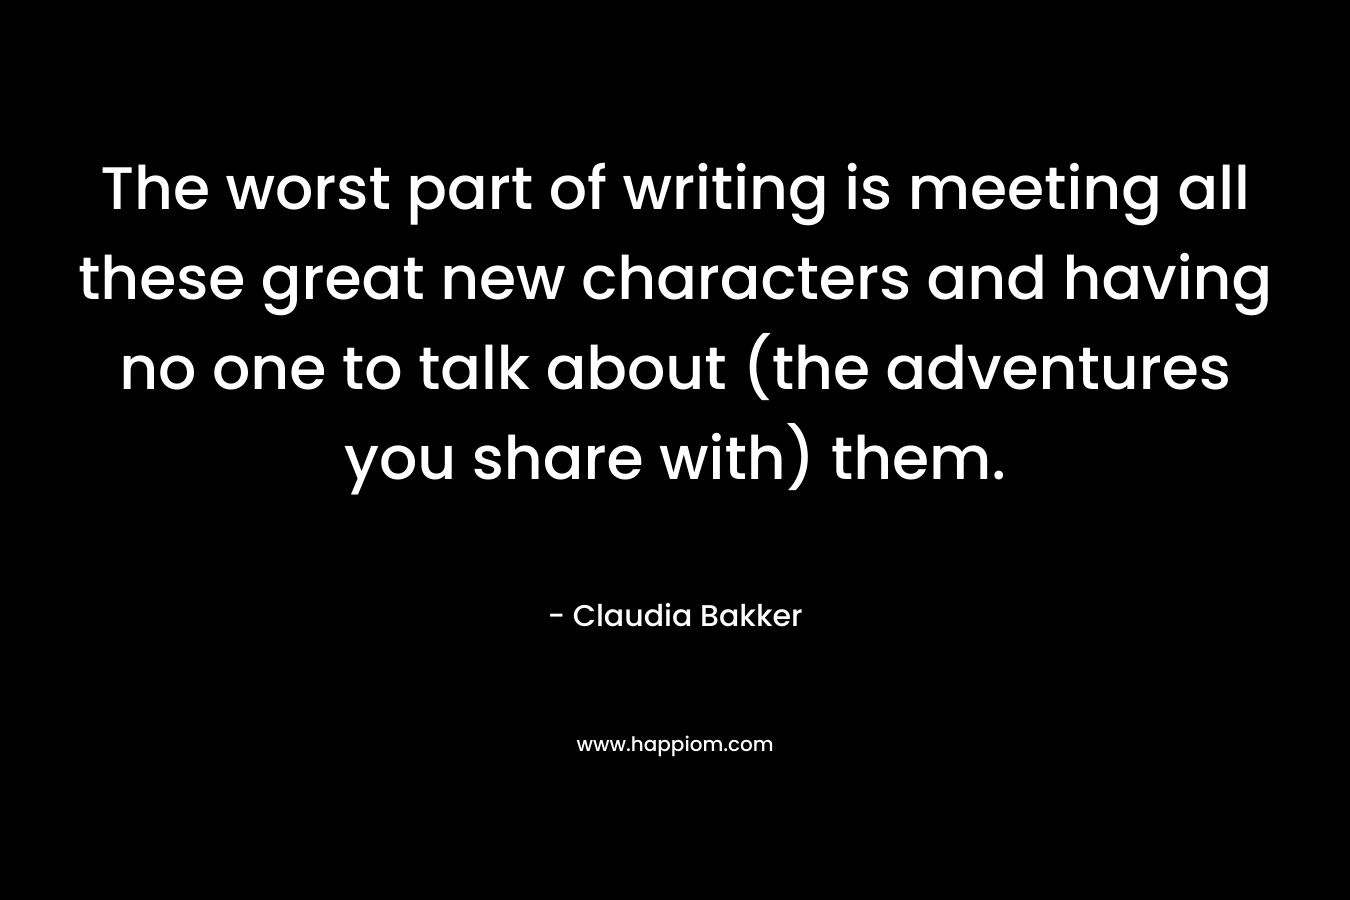 The worst part of writing is meeting all these great new characters and having no one to talk about (the adventures you share with) them. – Claudia Bakker